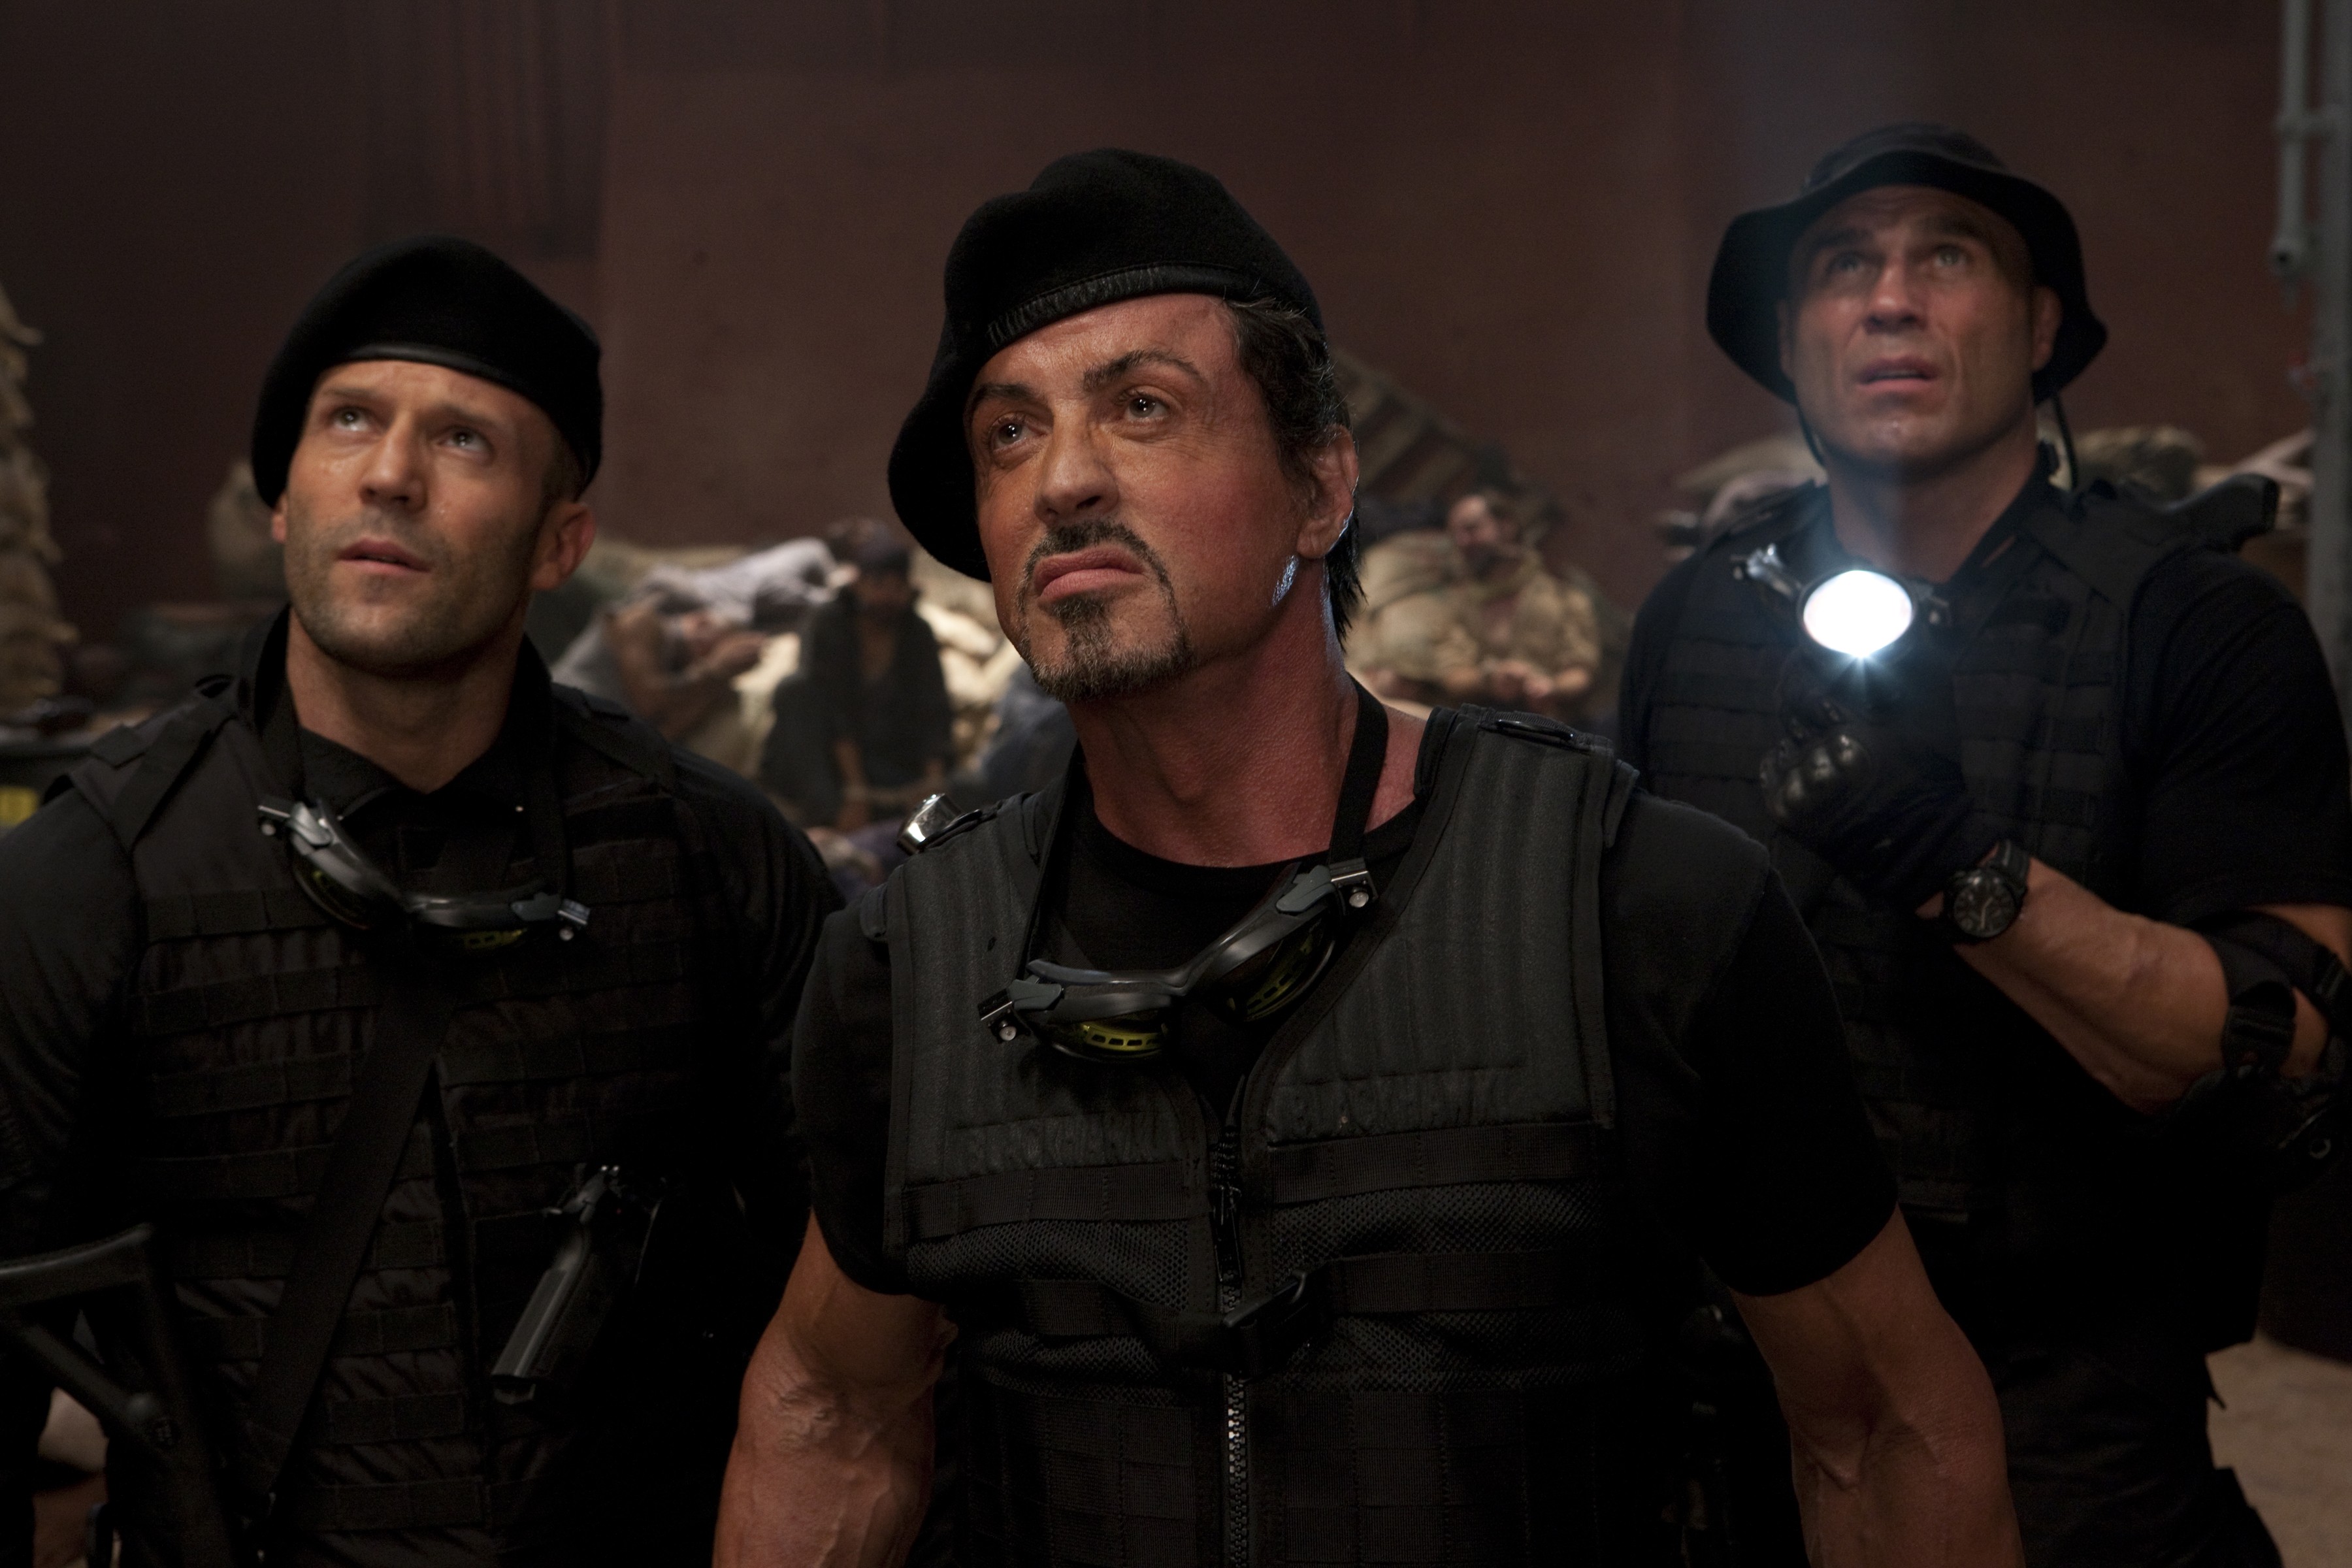 Sylvester Stallone, The Expendables, Dolph Lundgren, UFC, Randy Couture